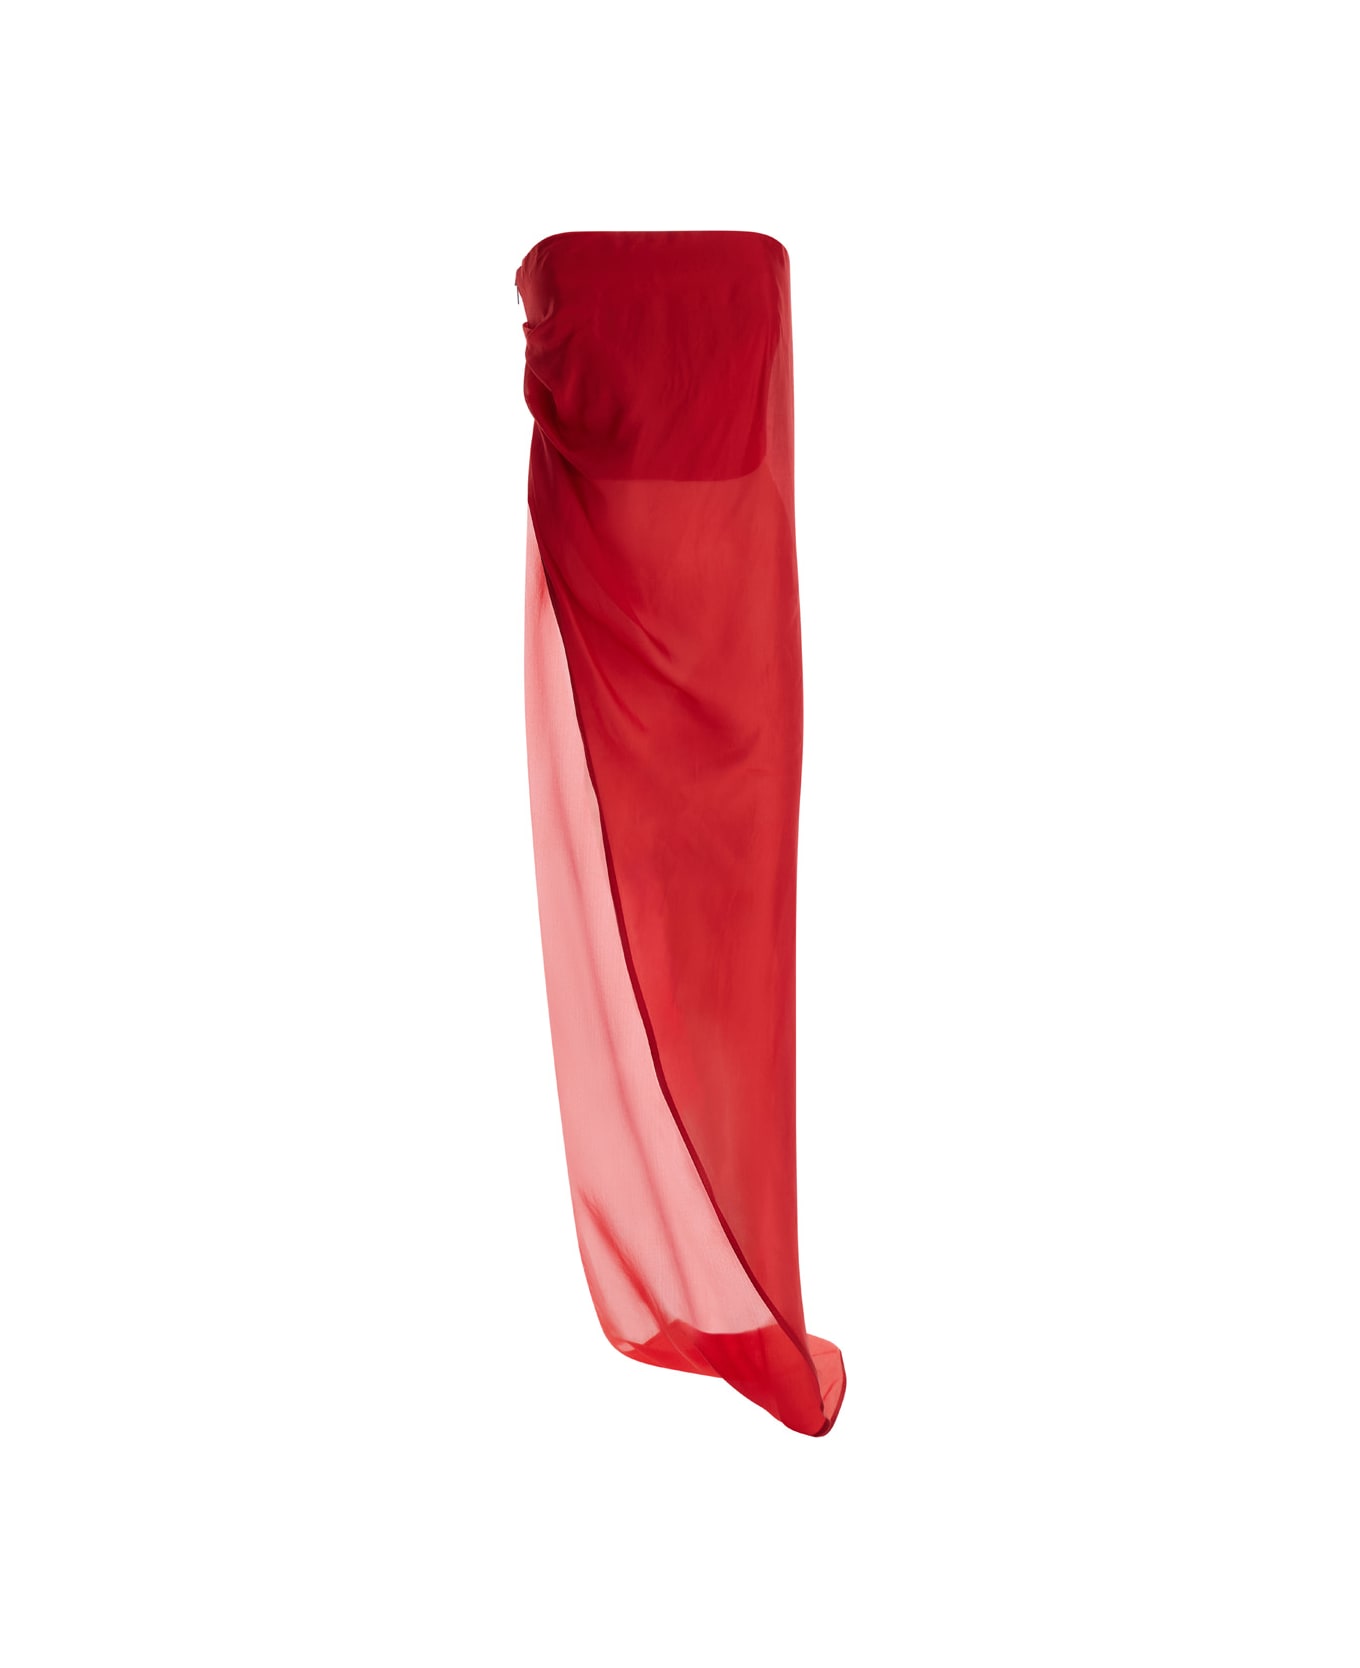 Rick Owens Red Strapless Asymmetric Long Top In Silk Woman - Red